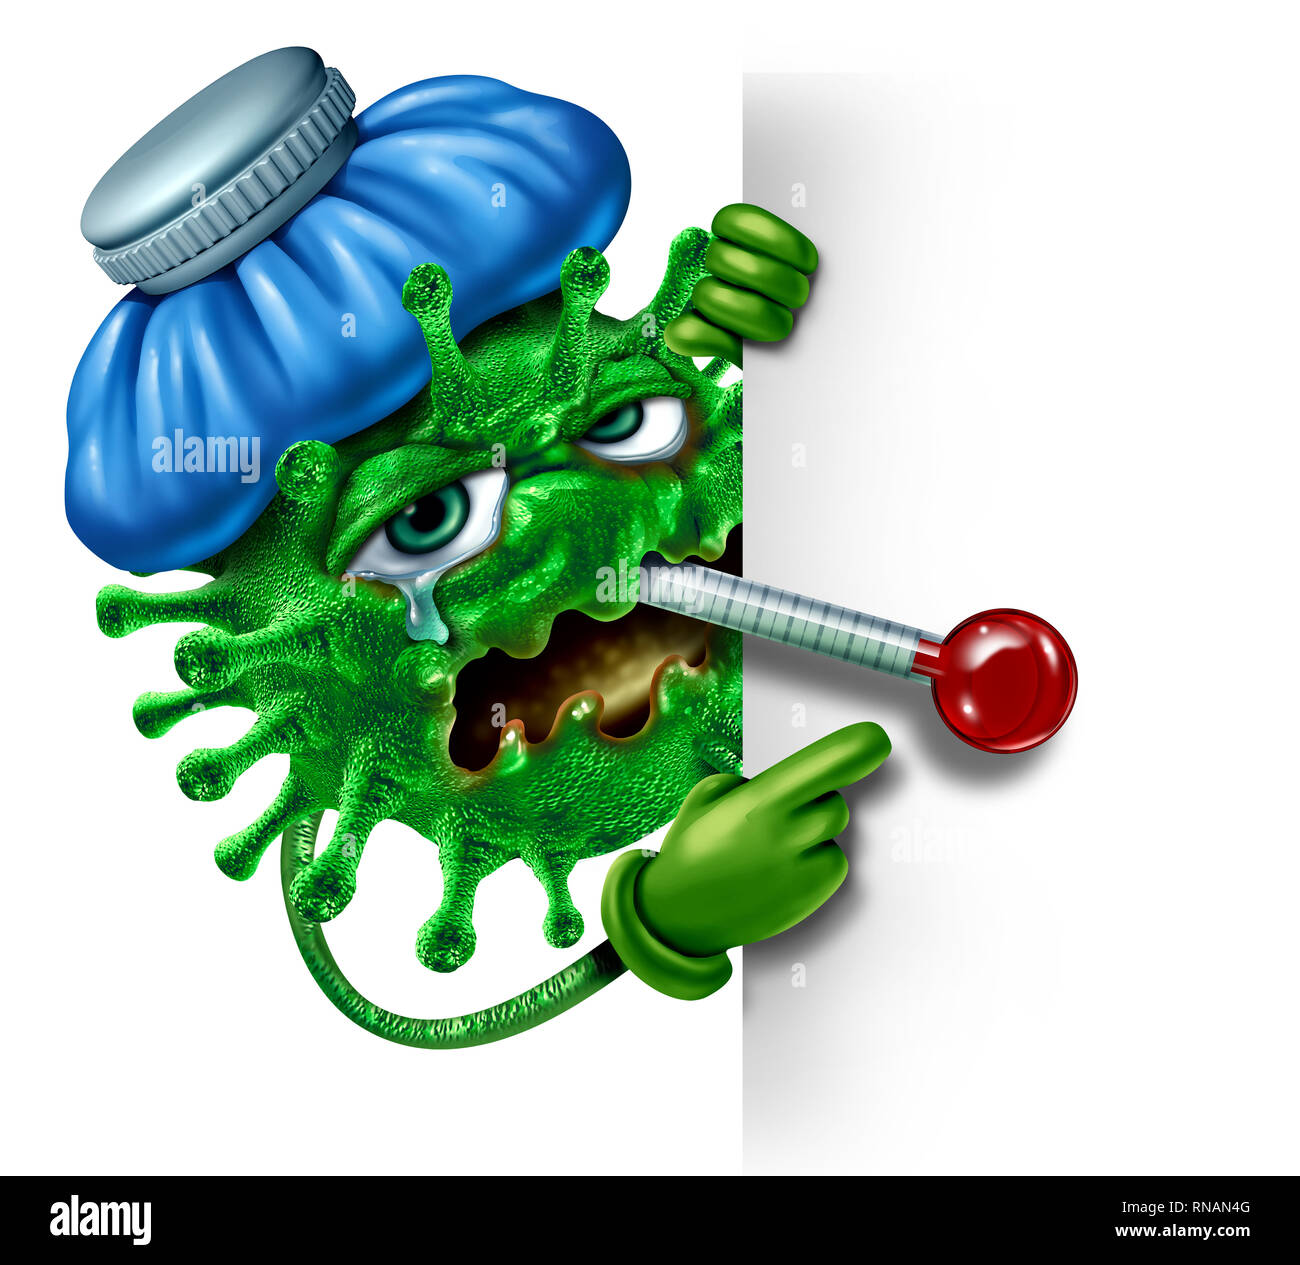 Winter flu character sign as an influenza or virus infection symbol as a sick feverish cartoon pathogen cell with an ice bag and thermometer. Stock Photo